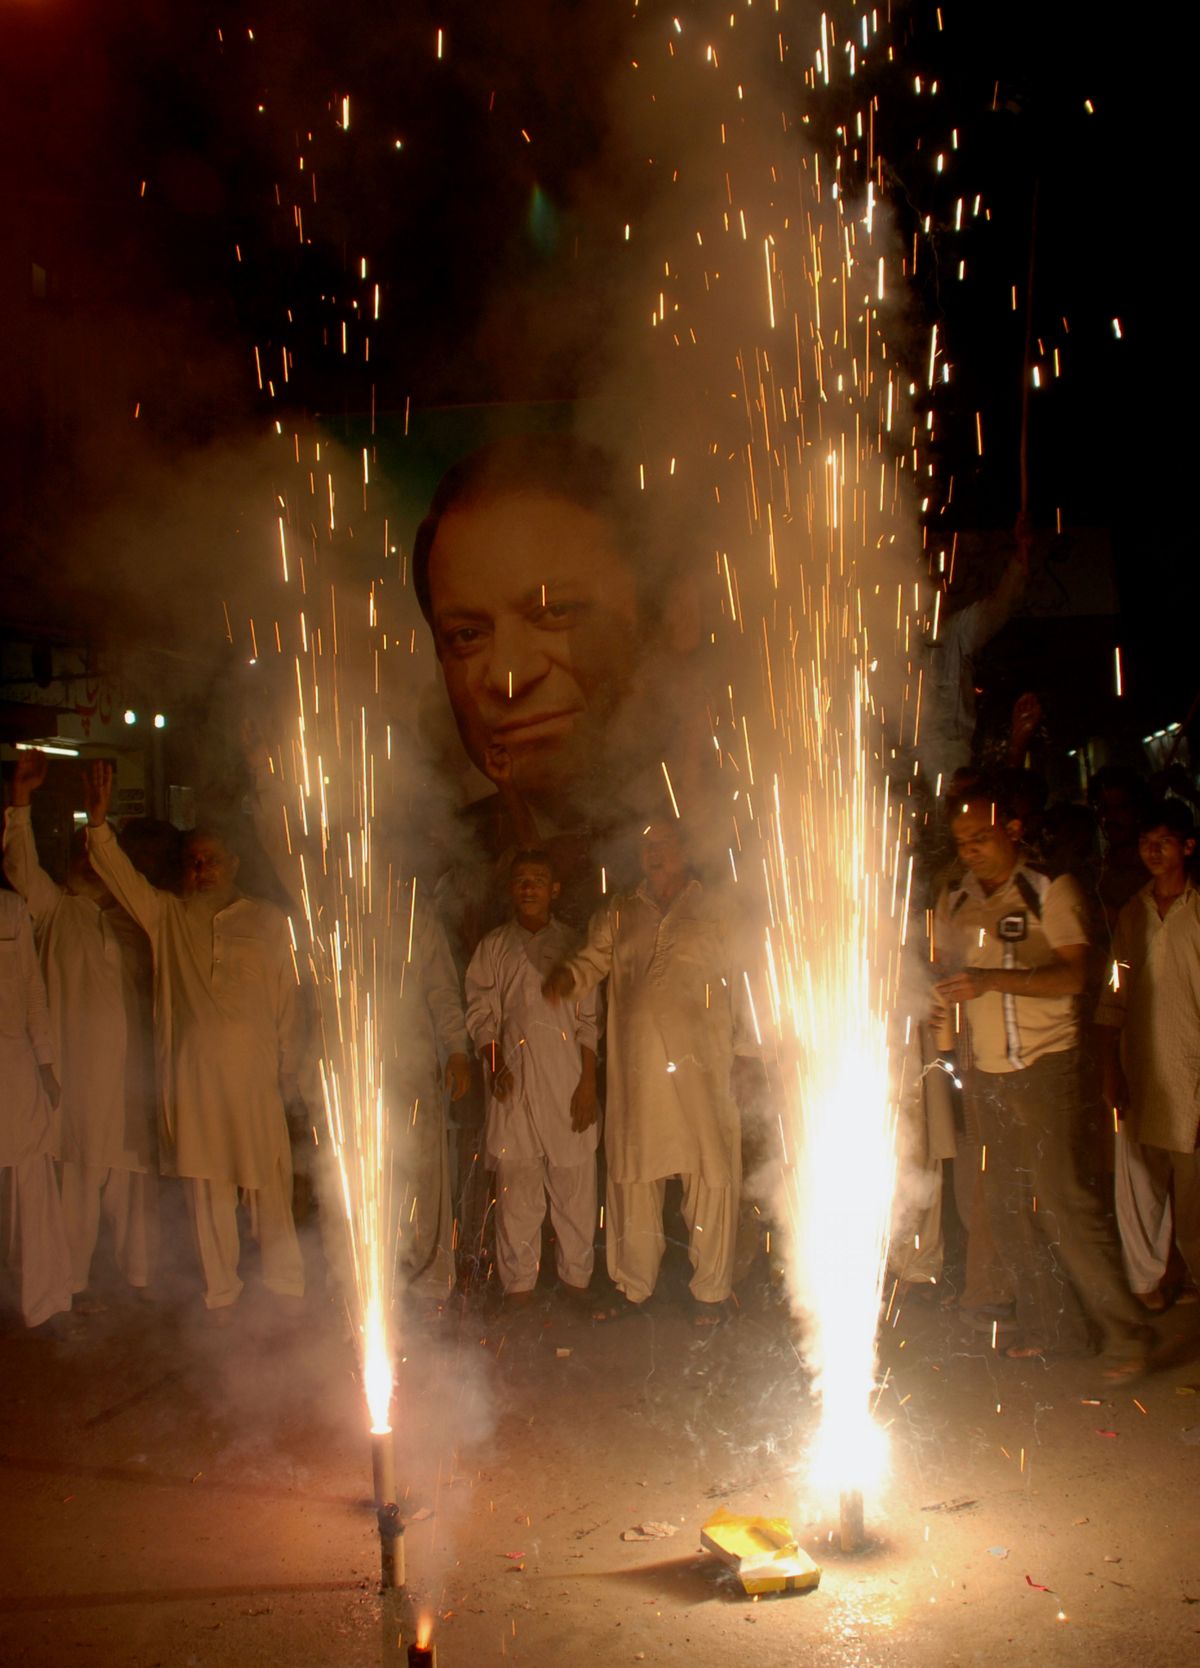 Against the backdrop of a poster of former Prime Minister Nawaz Sharif, Pakistanis in Multan celebrate the resignation of President Pervez Musharraf with dancing and fireworks.  (Associated Press / The Spokesman-Review)